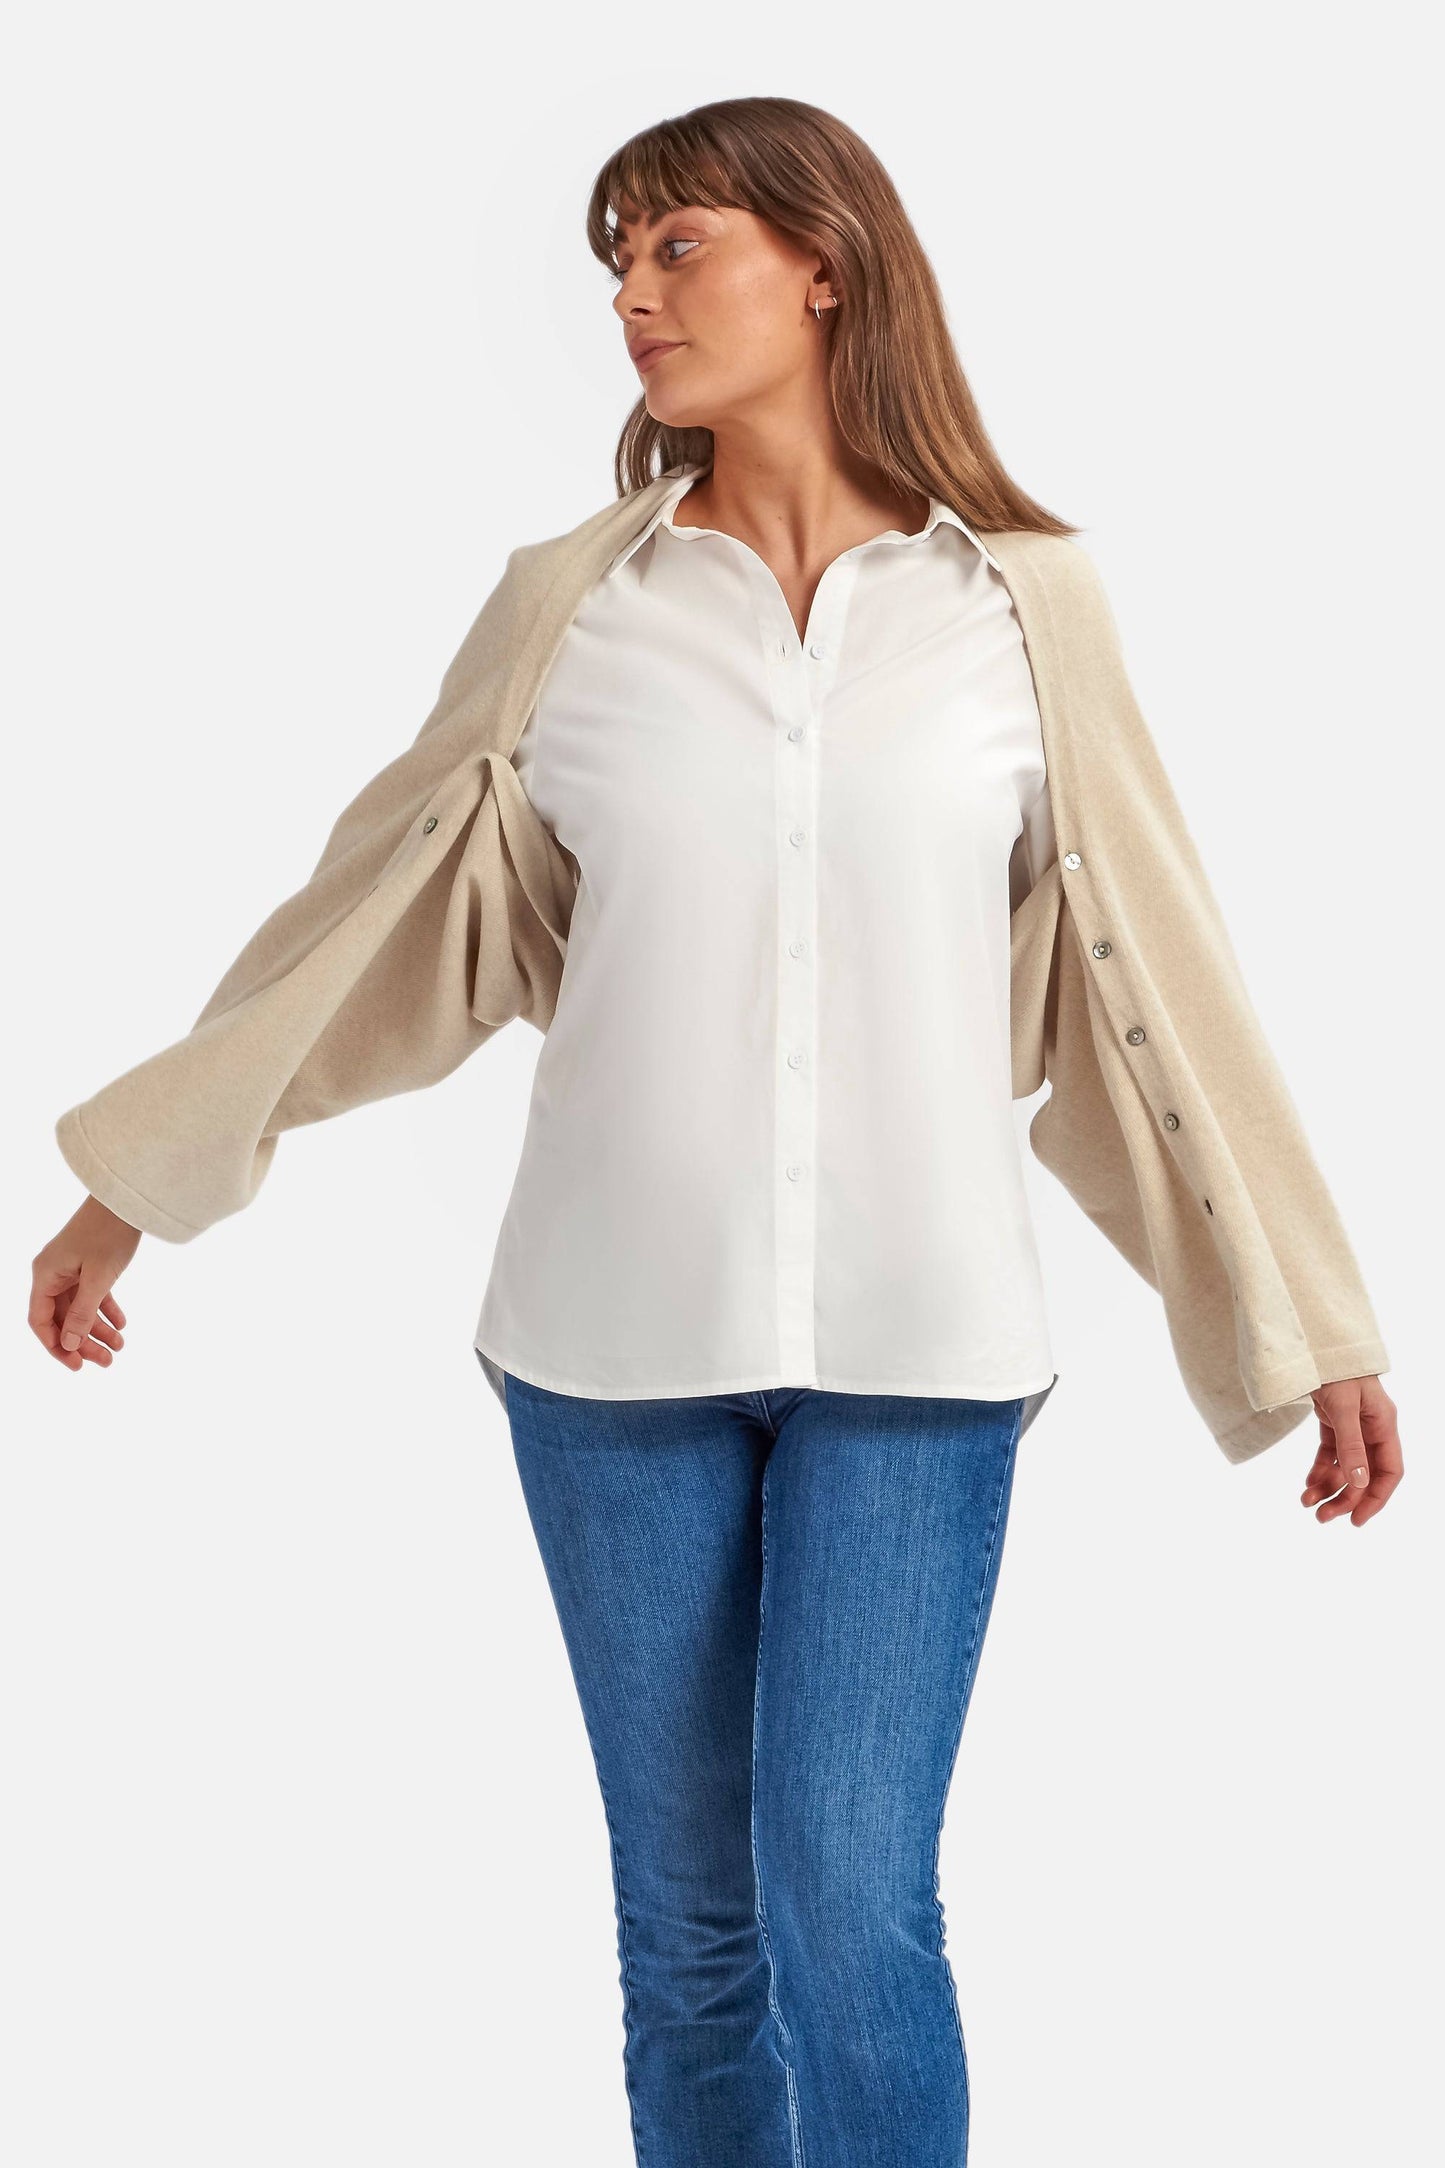 Cashmere Button Long Poncho in Natural by Woodcock & Cavendish for sale - Woodcock and Cavendish